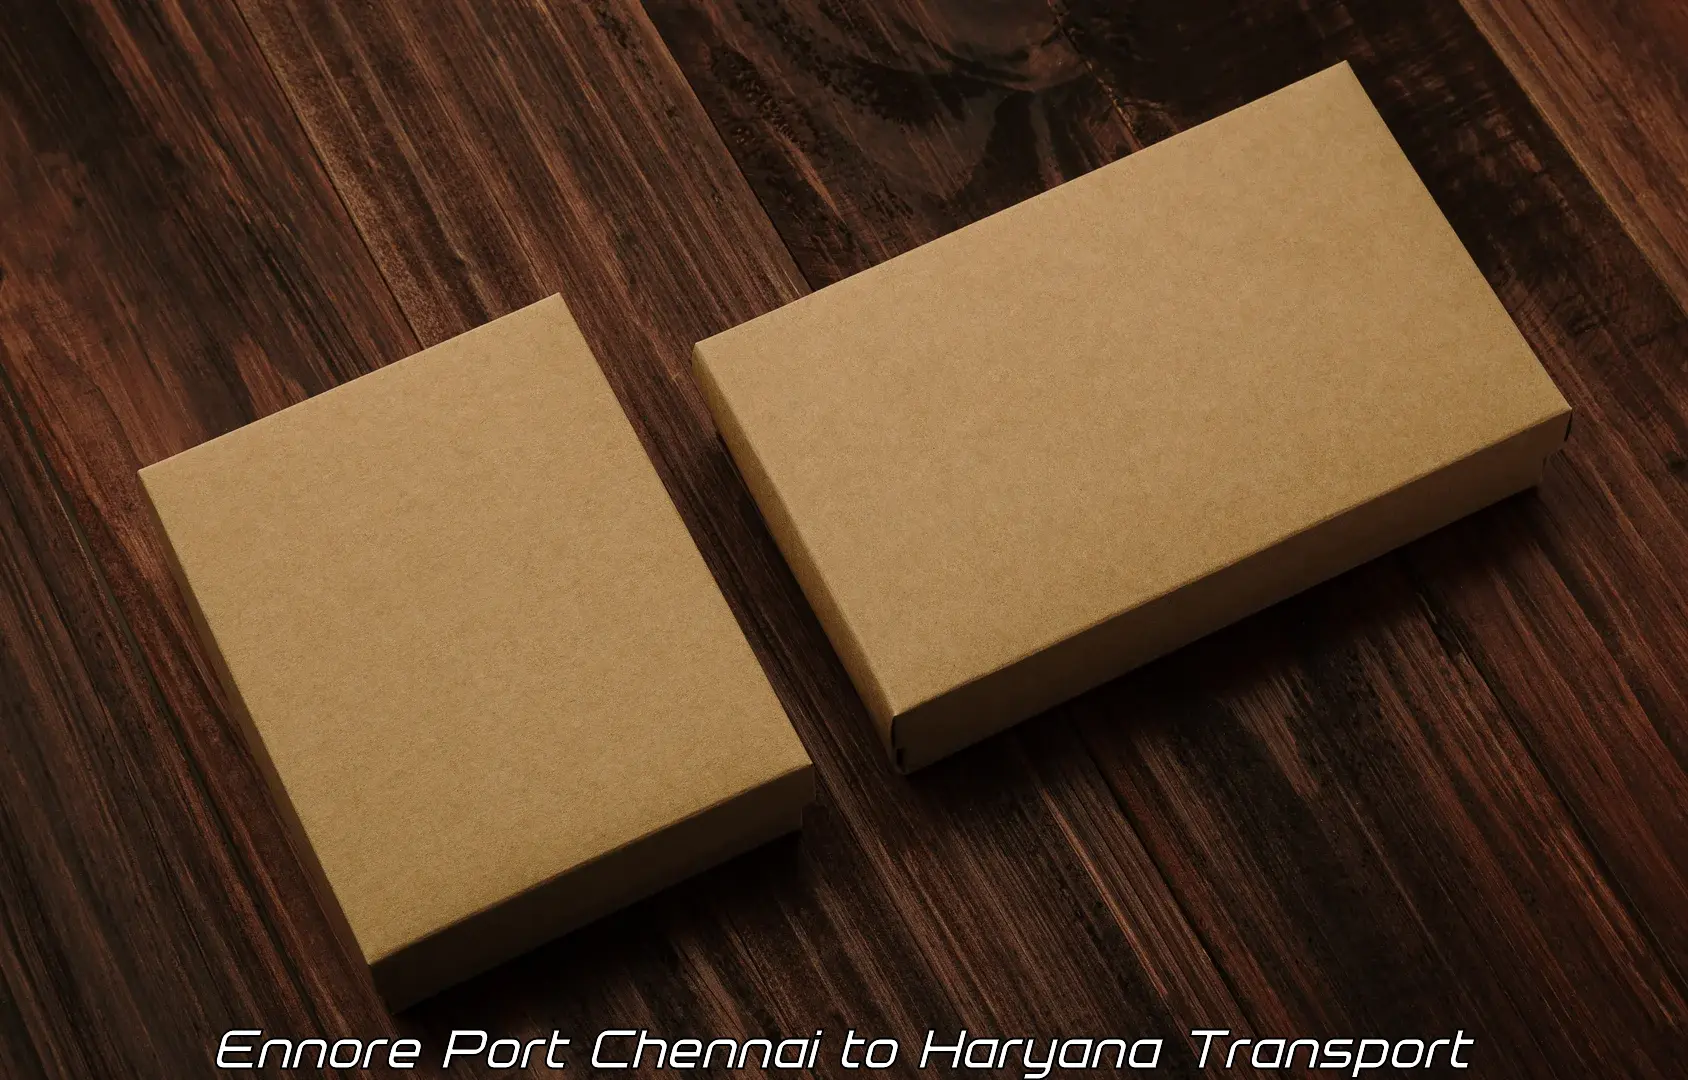 Land transport services Ennore Port Chennai to NCR Haryana